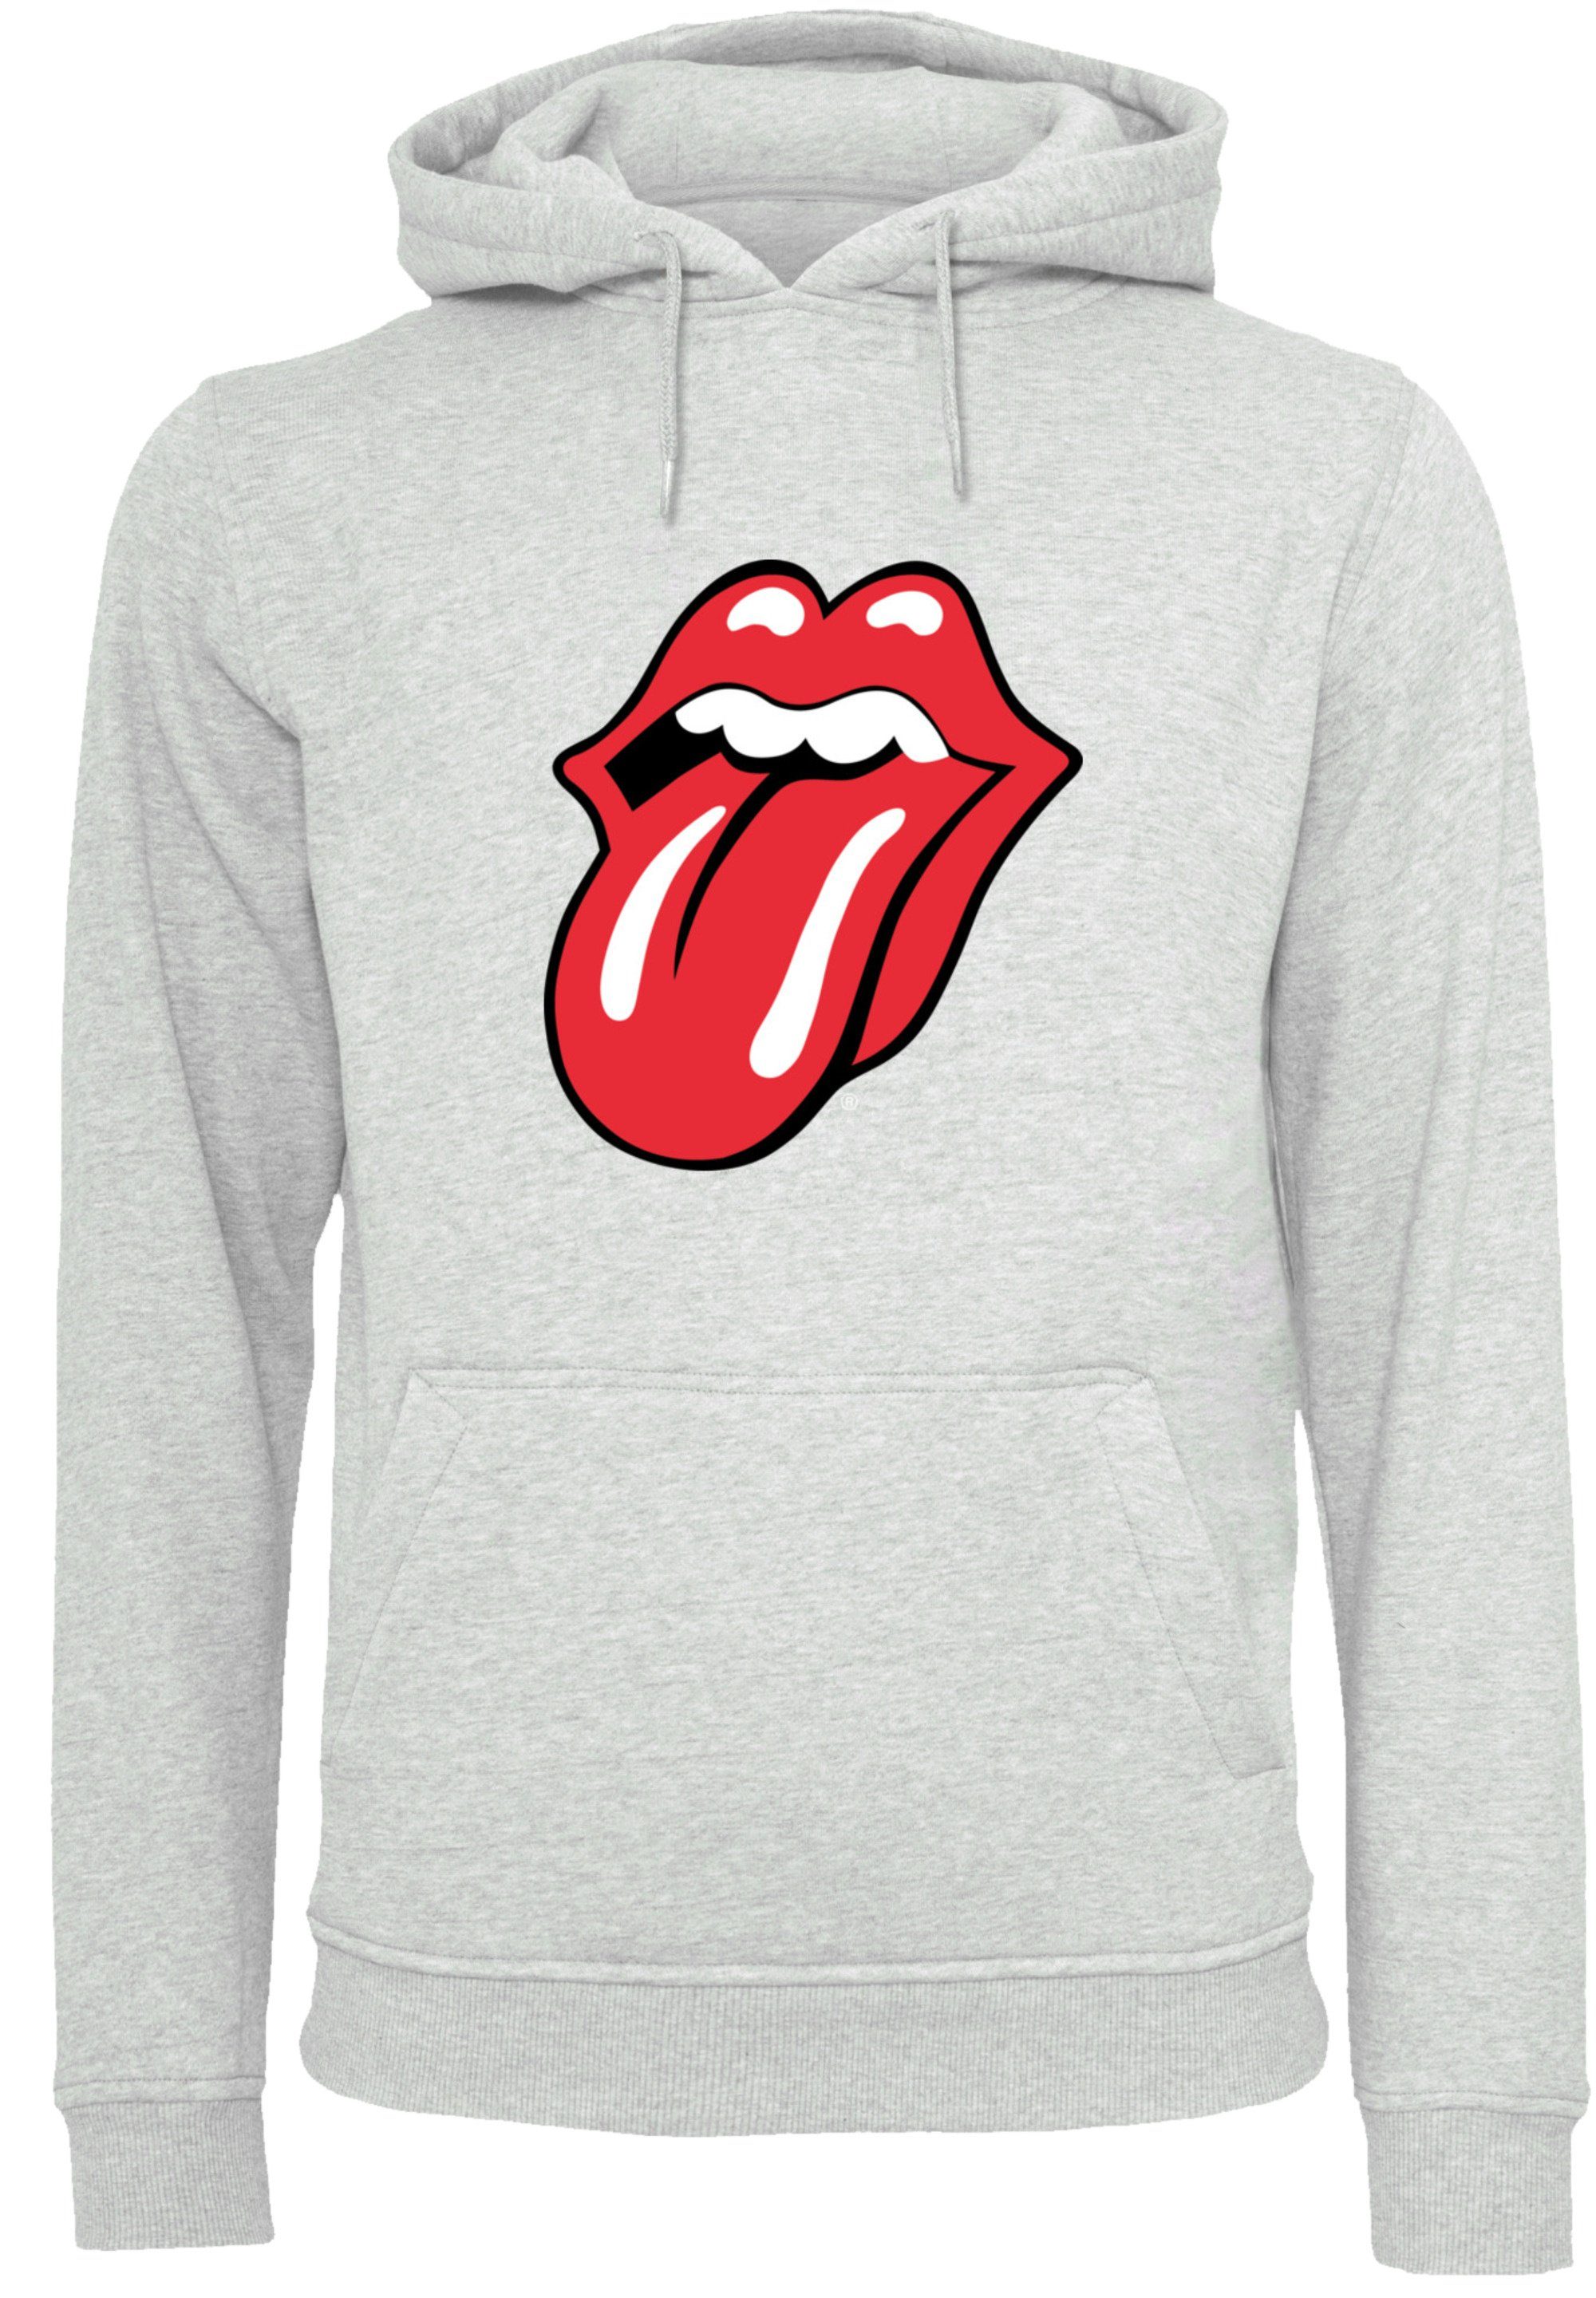 Kapuzenpullover The Stones Bequem Band Rock Rolling Hoodie, heather Zunge grey Warm, Classic F4NT4STIC Musik